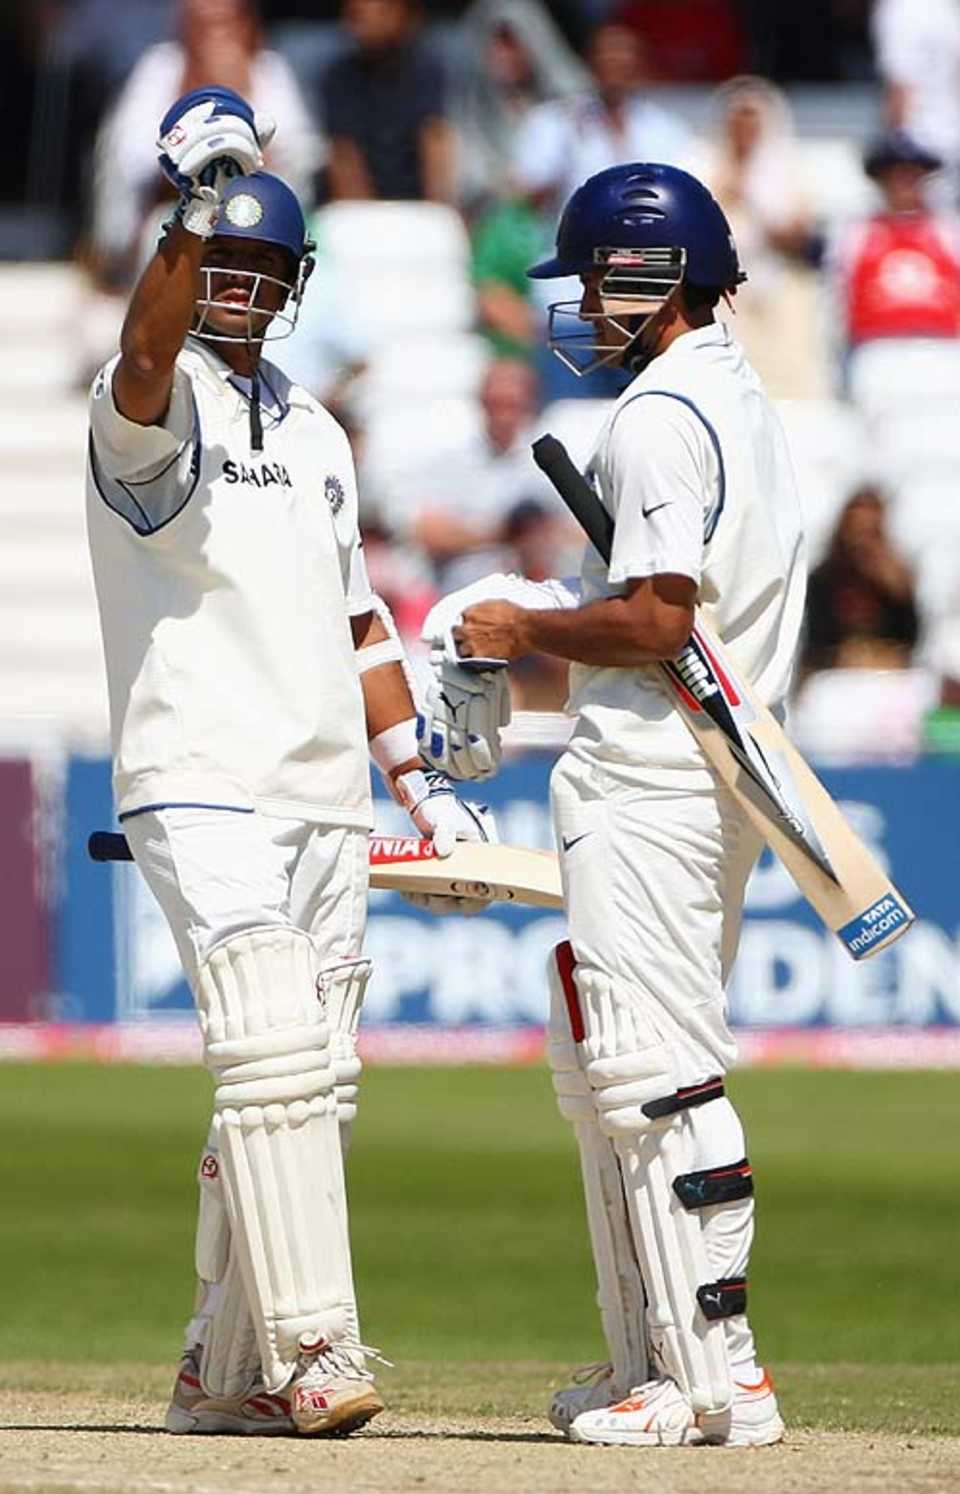 Rahul Dravid and Sourav Ganguly took India through to the target